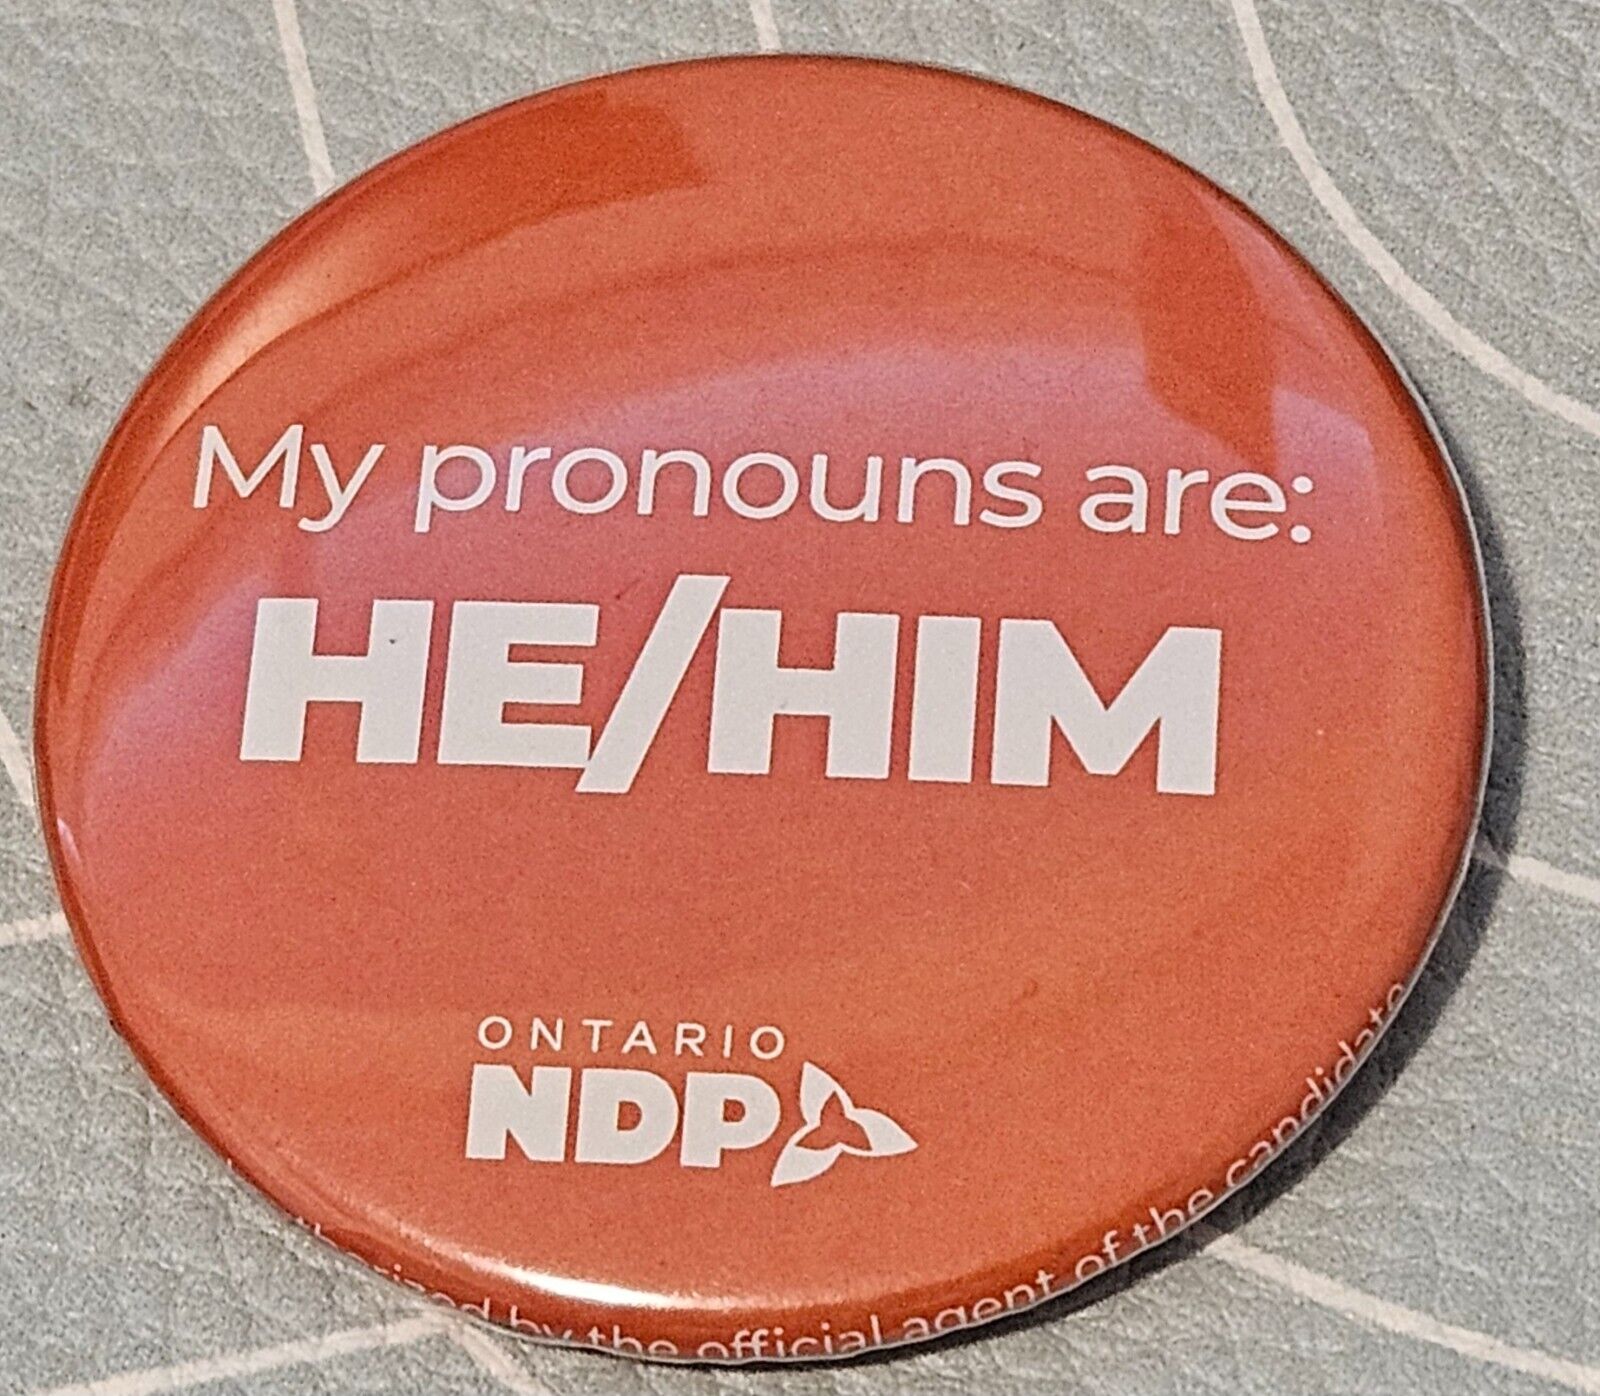 HE/HIM Authentic New Democratic Party of Canada Button NDP LGBTQA LARGE